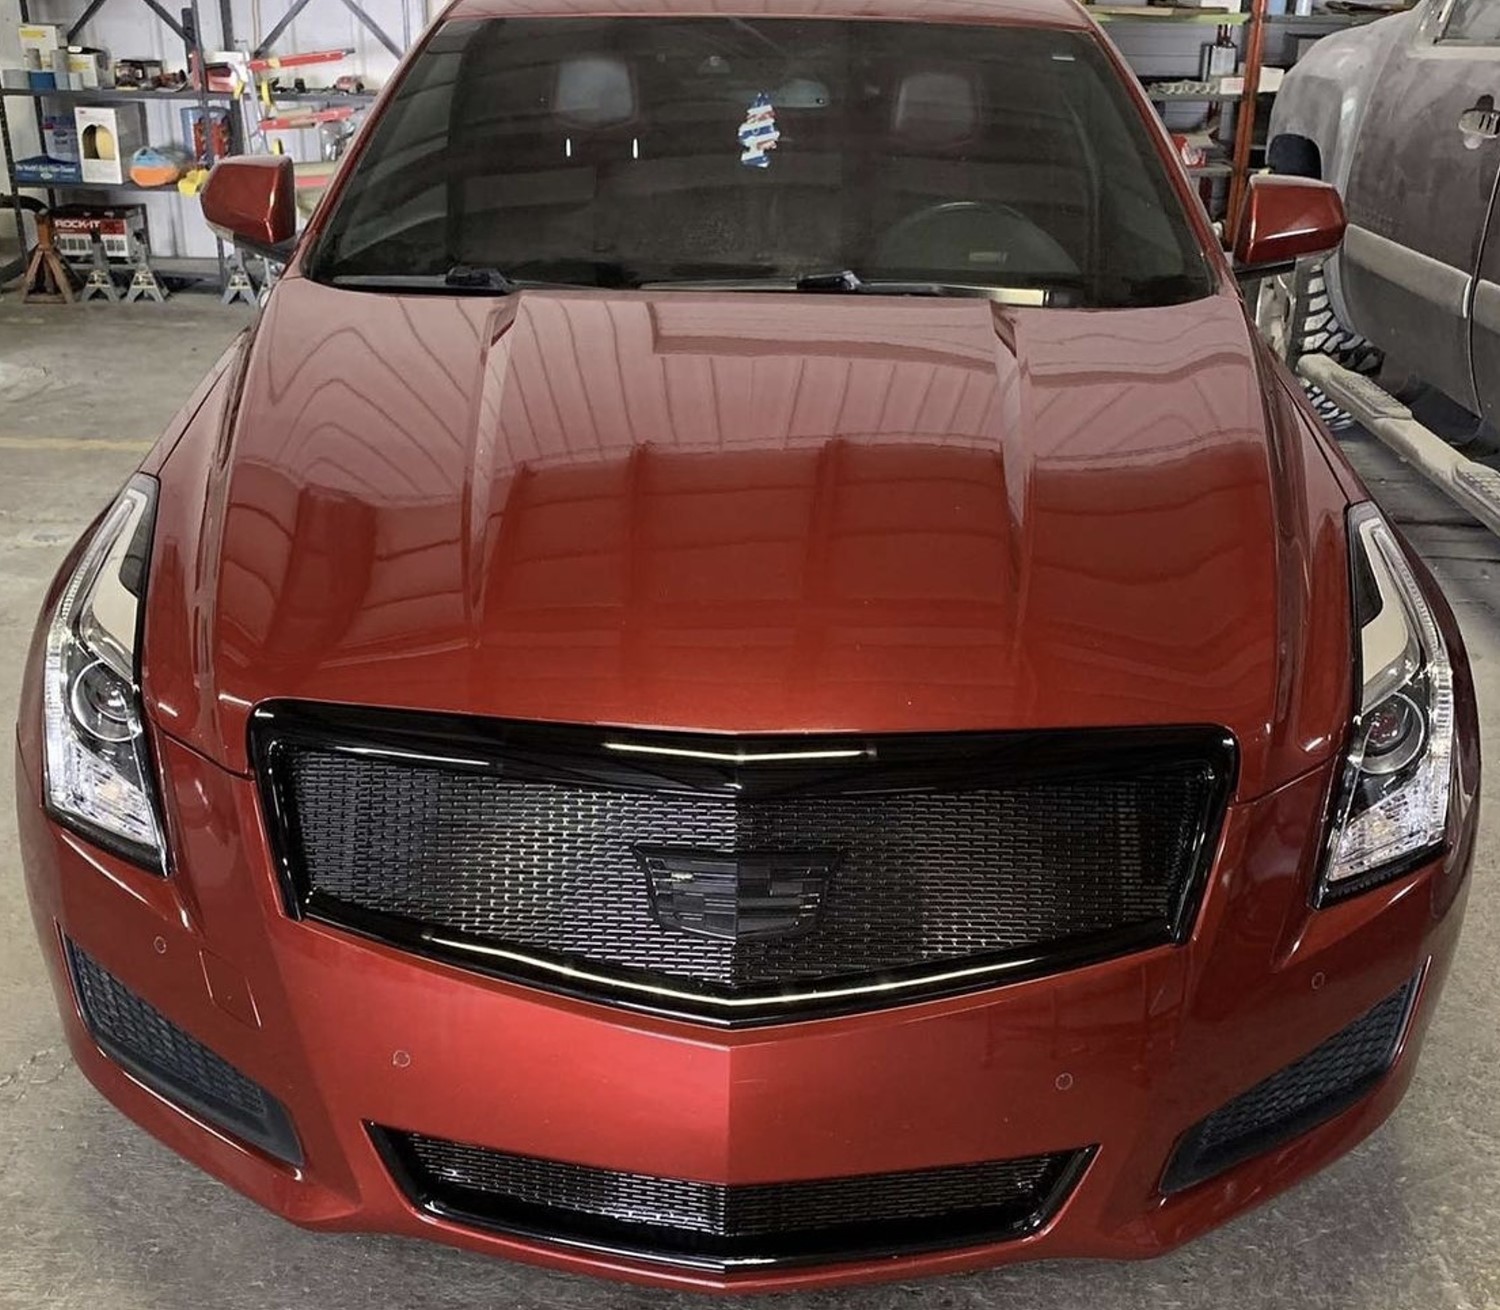 Sleek and Stylish: All Black Grille for Your 2013 Cadillac ATS